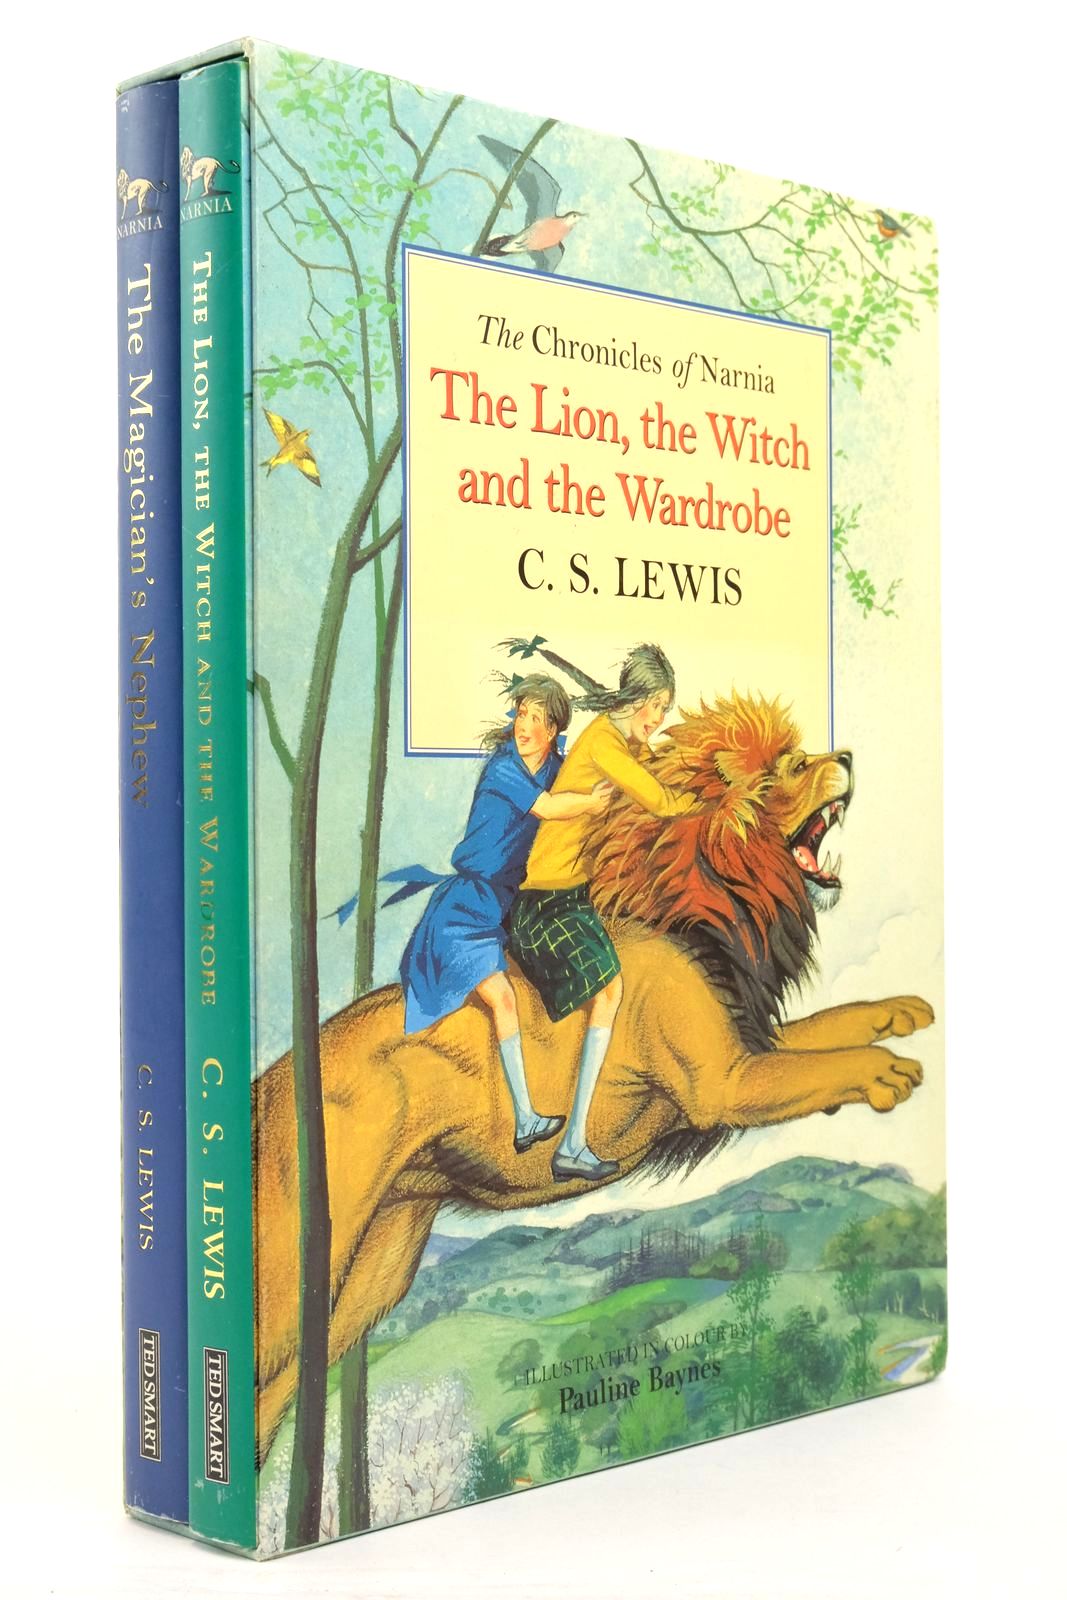 Photo of THE CHRONICLES OF NARNIA- Stock Number: 2137765